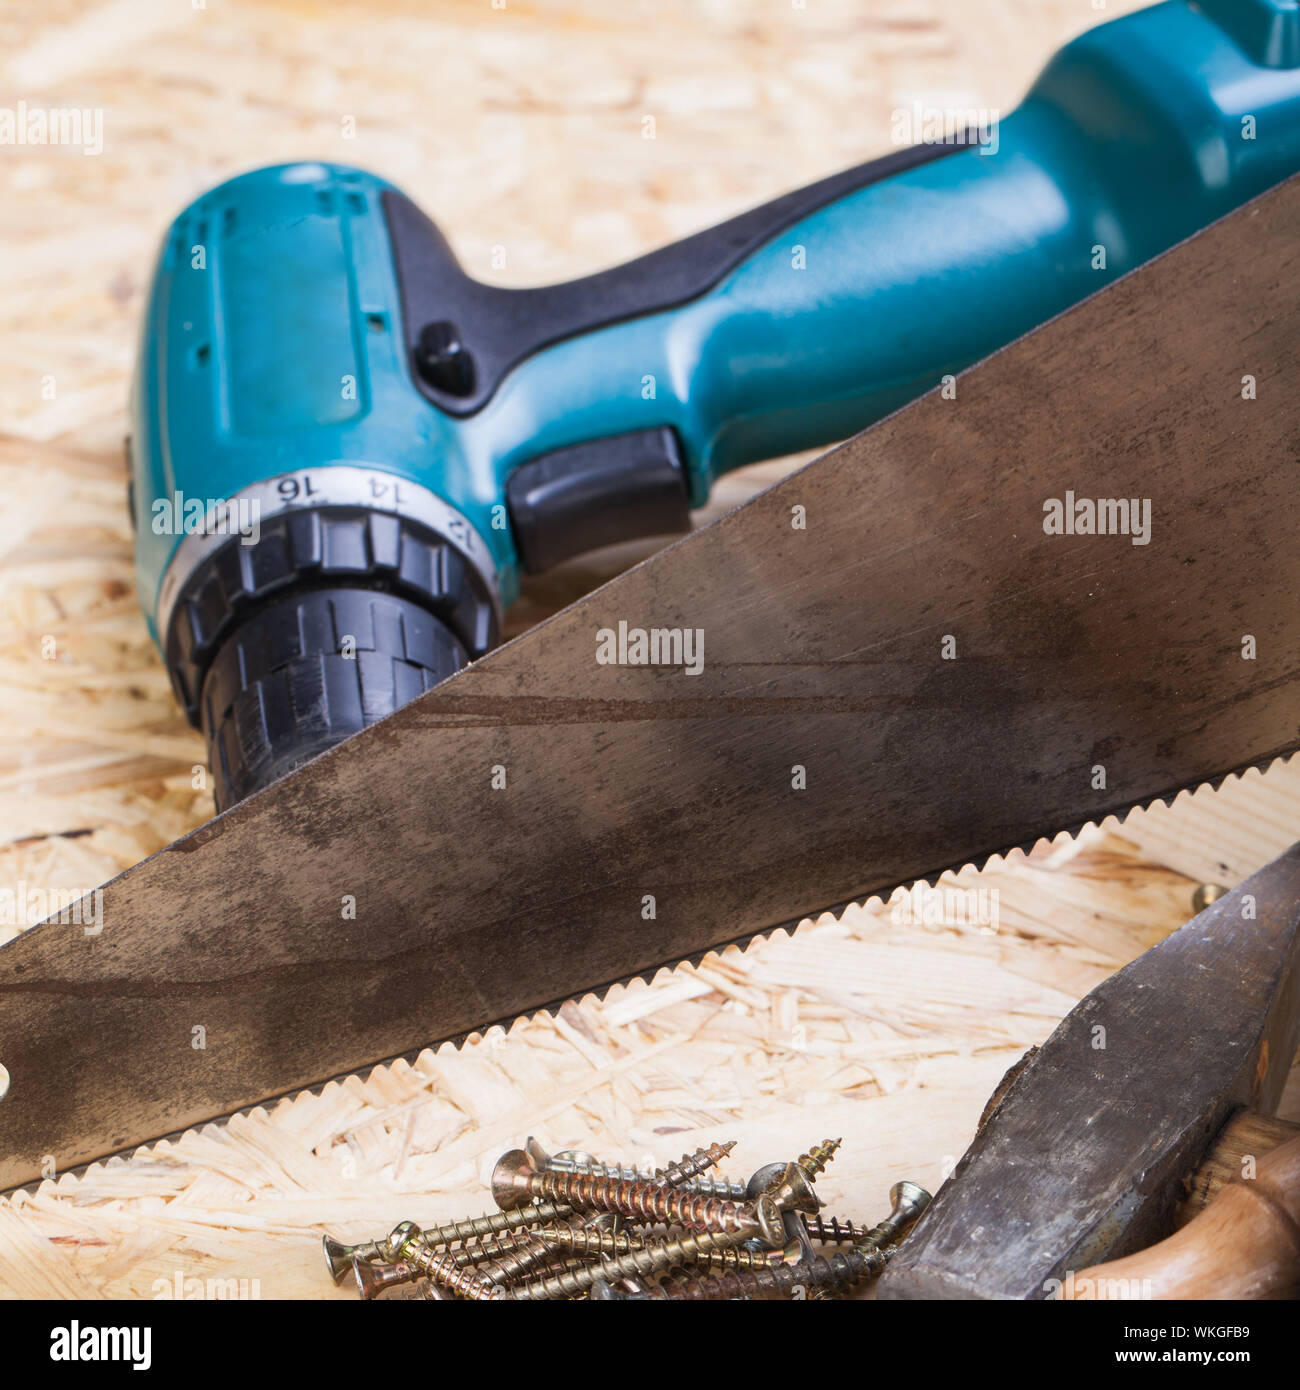 https://c8.alamy.com/comp/WKGFB9/battery-operated-portable-hand-drill-with-timber-screwdrivers-and-screws-surrounded-by-fresh-wood-shavings-in-a-carpentry-joinery-diy-or-constructi-WKGFB9.jpg